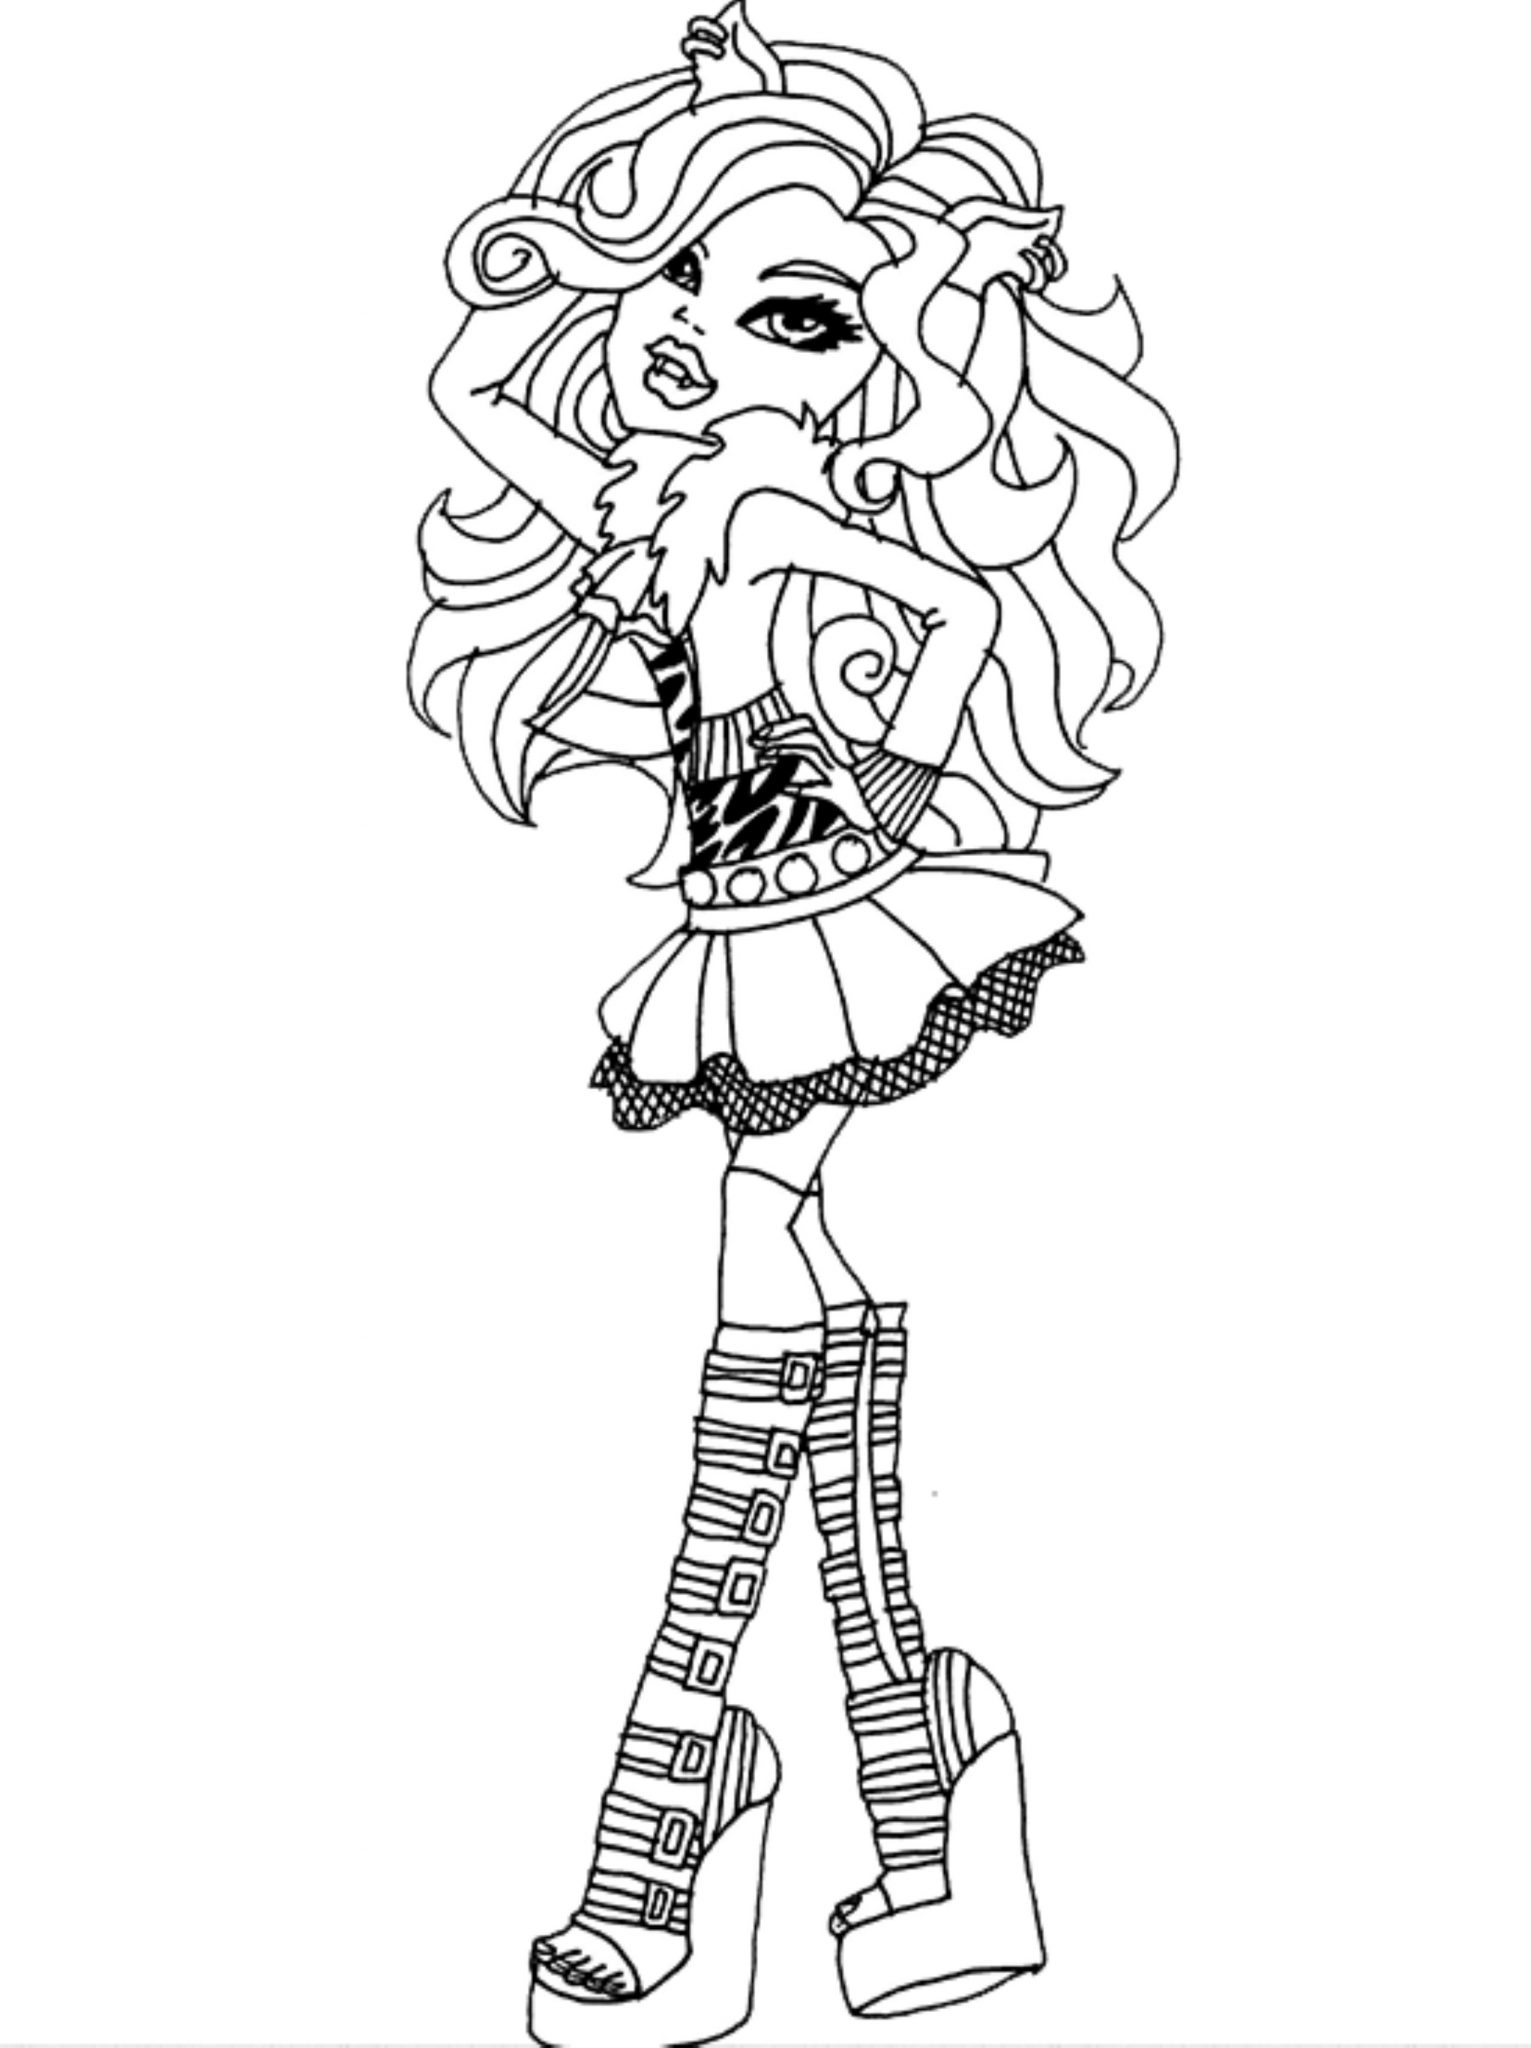 monster-high-printable-coloring-pages-spectra-vondergeist